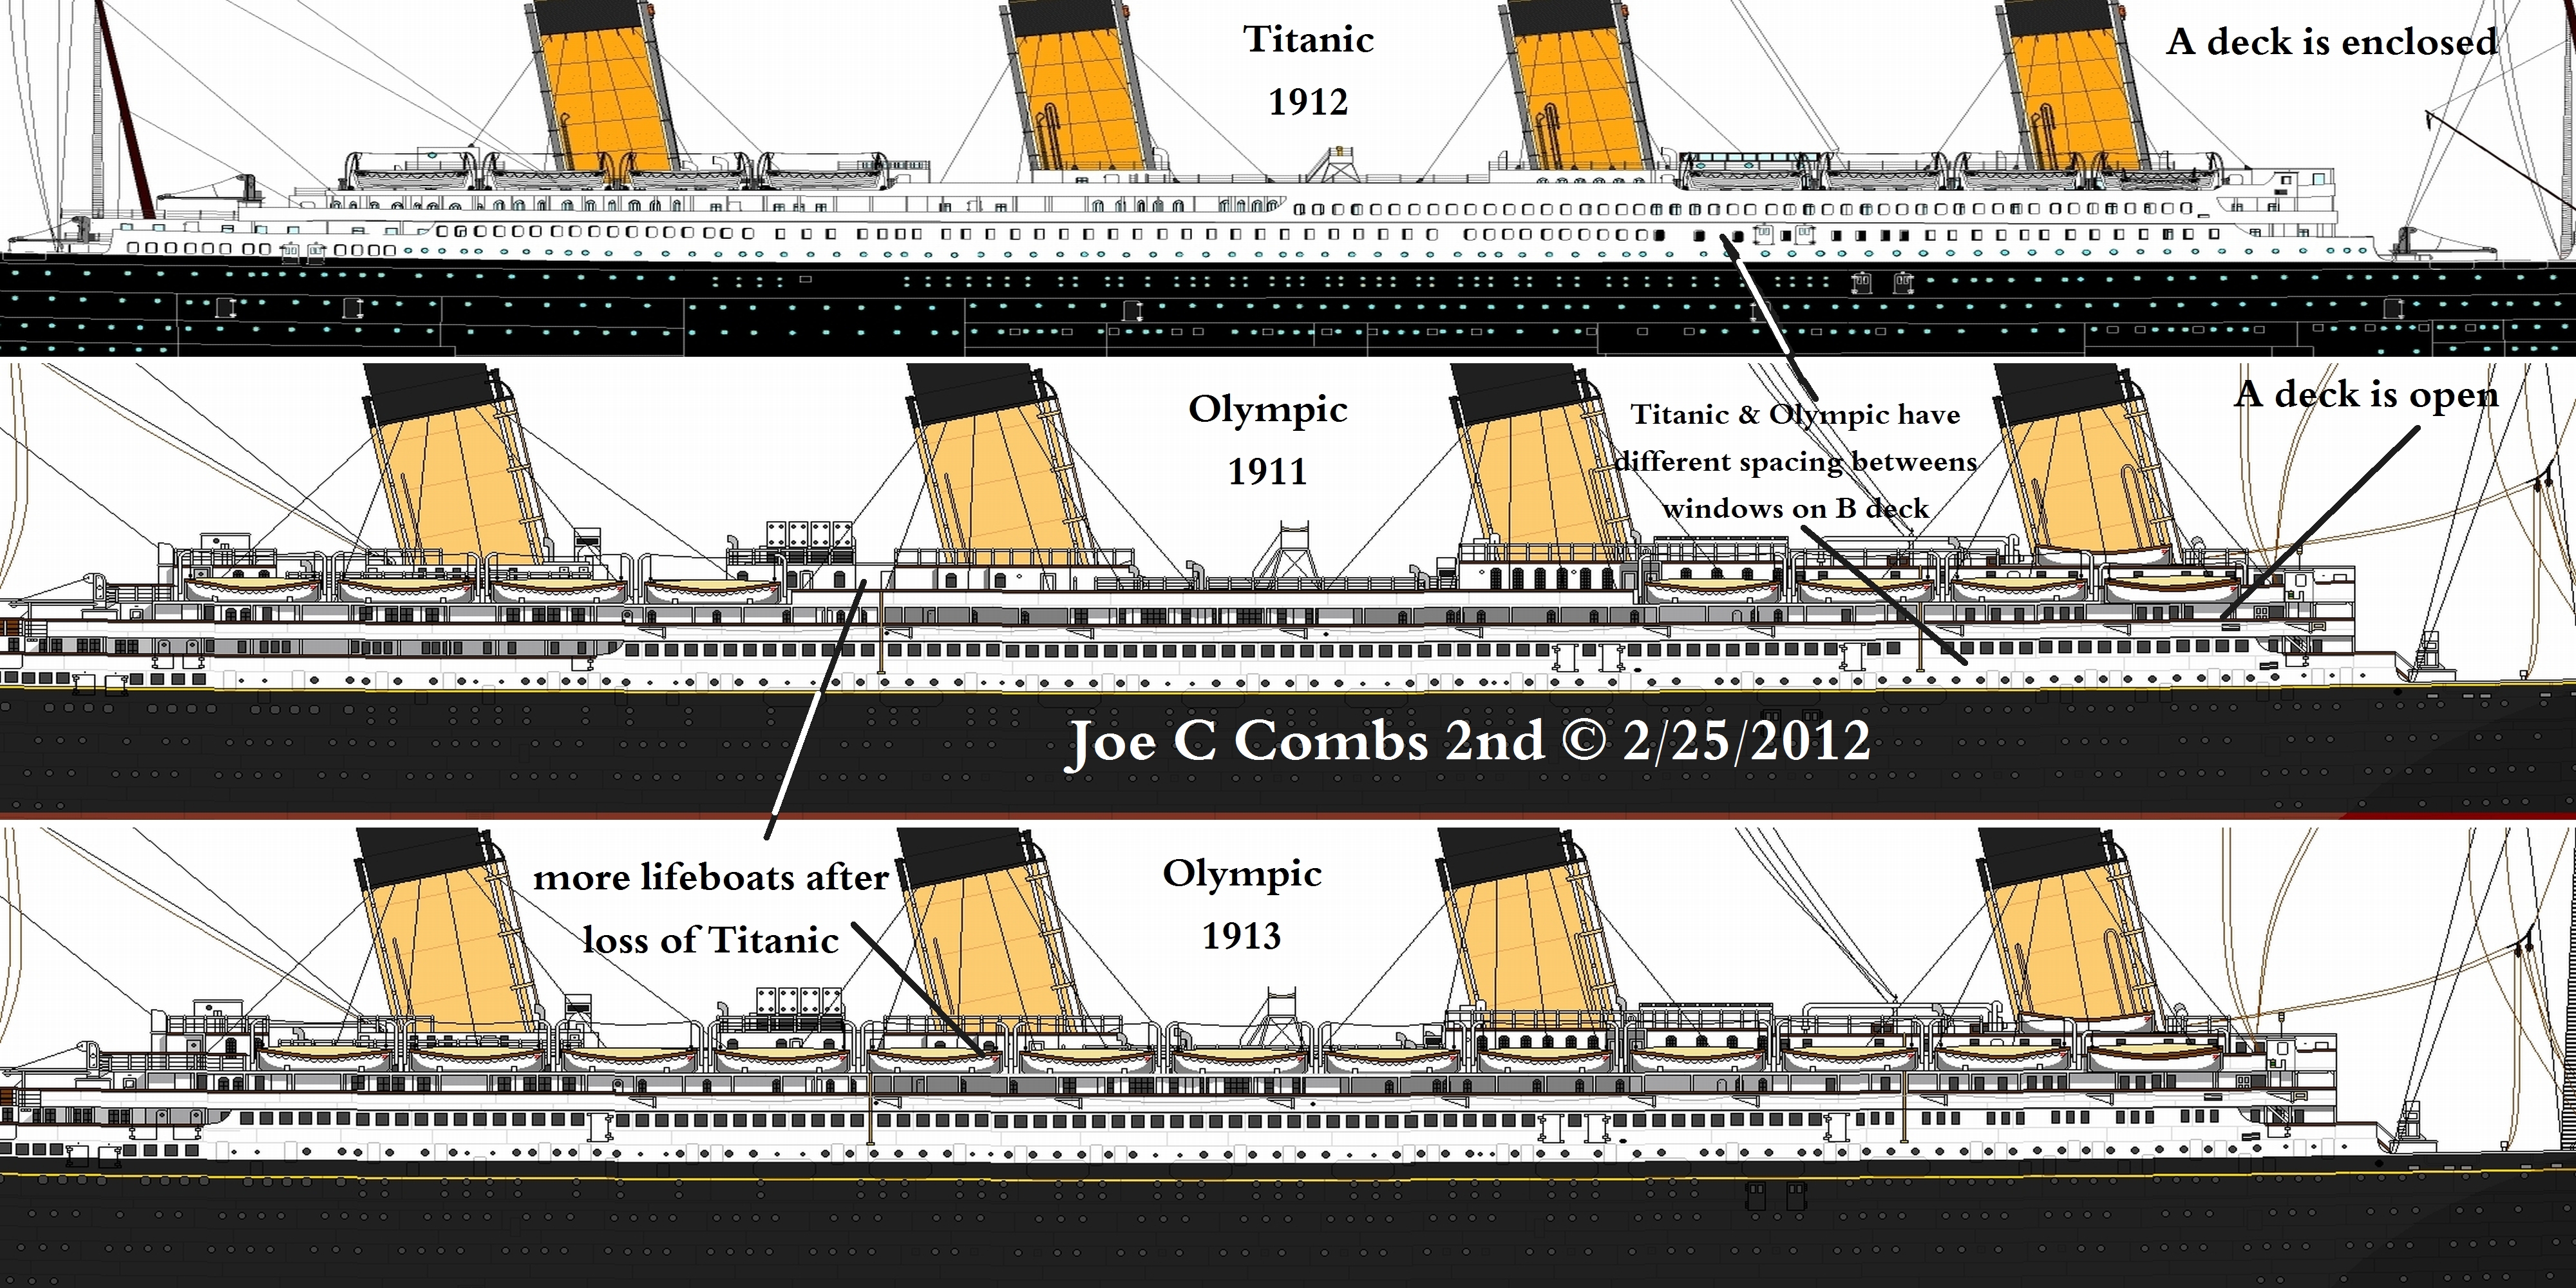 Titanic and Olympic: How to tell them apart in photographs. | joeccombs2nd